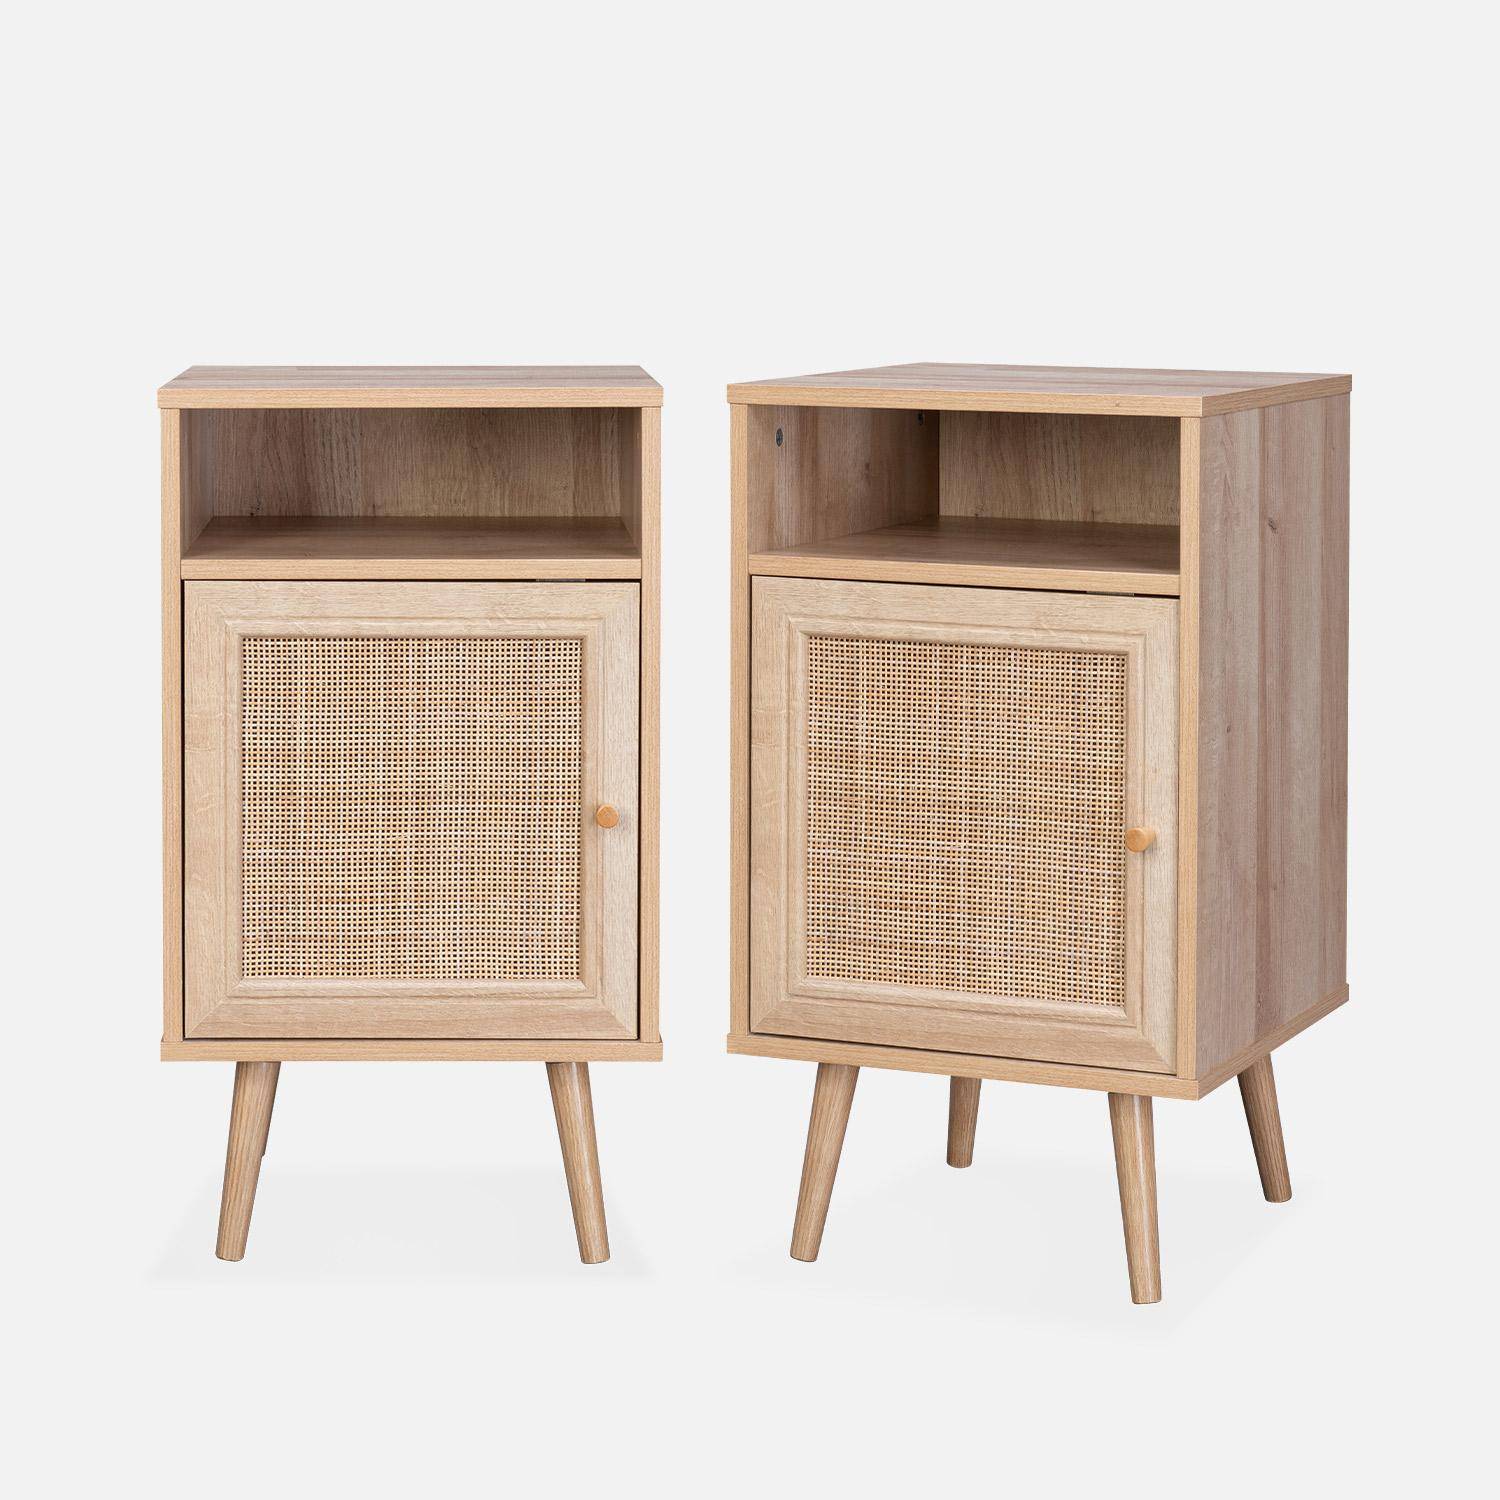 Pair of Scandi-style wood and cane rattan bedside tables with cupboard, 40x39x70cm - Boheme - Natural Wood colour Photo4